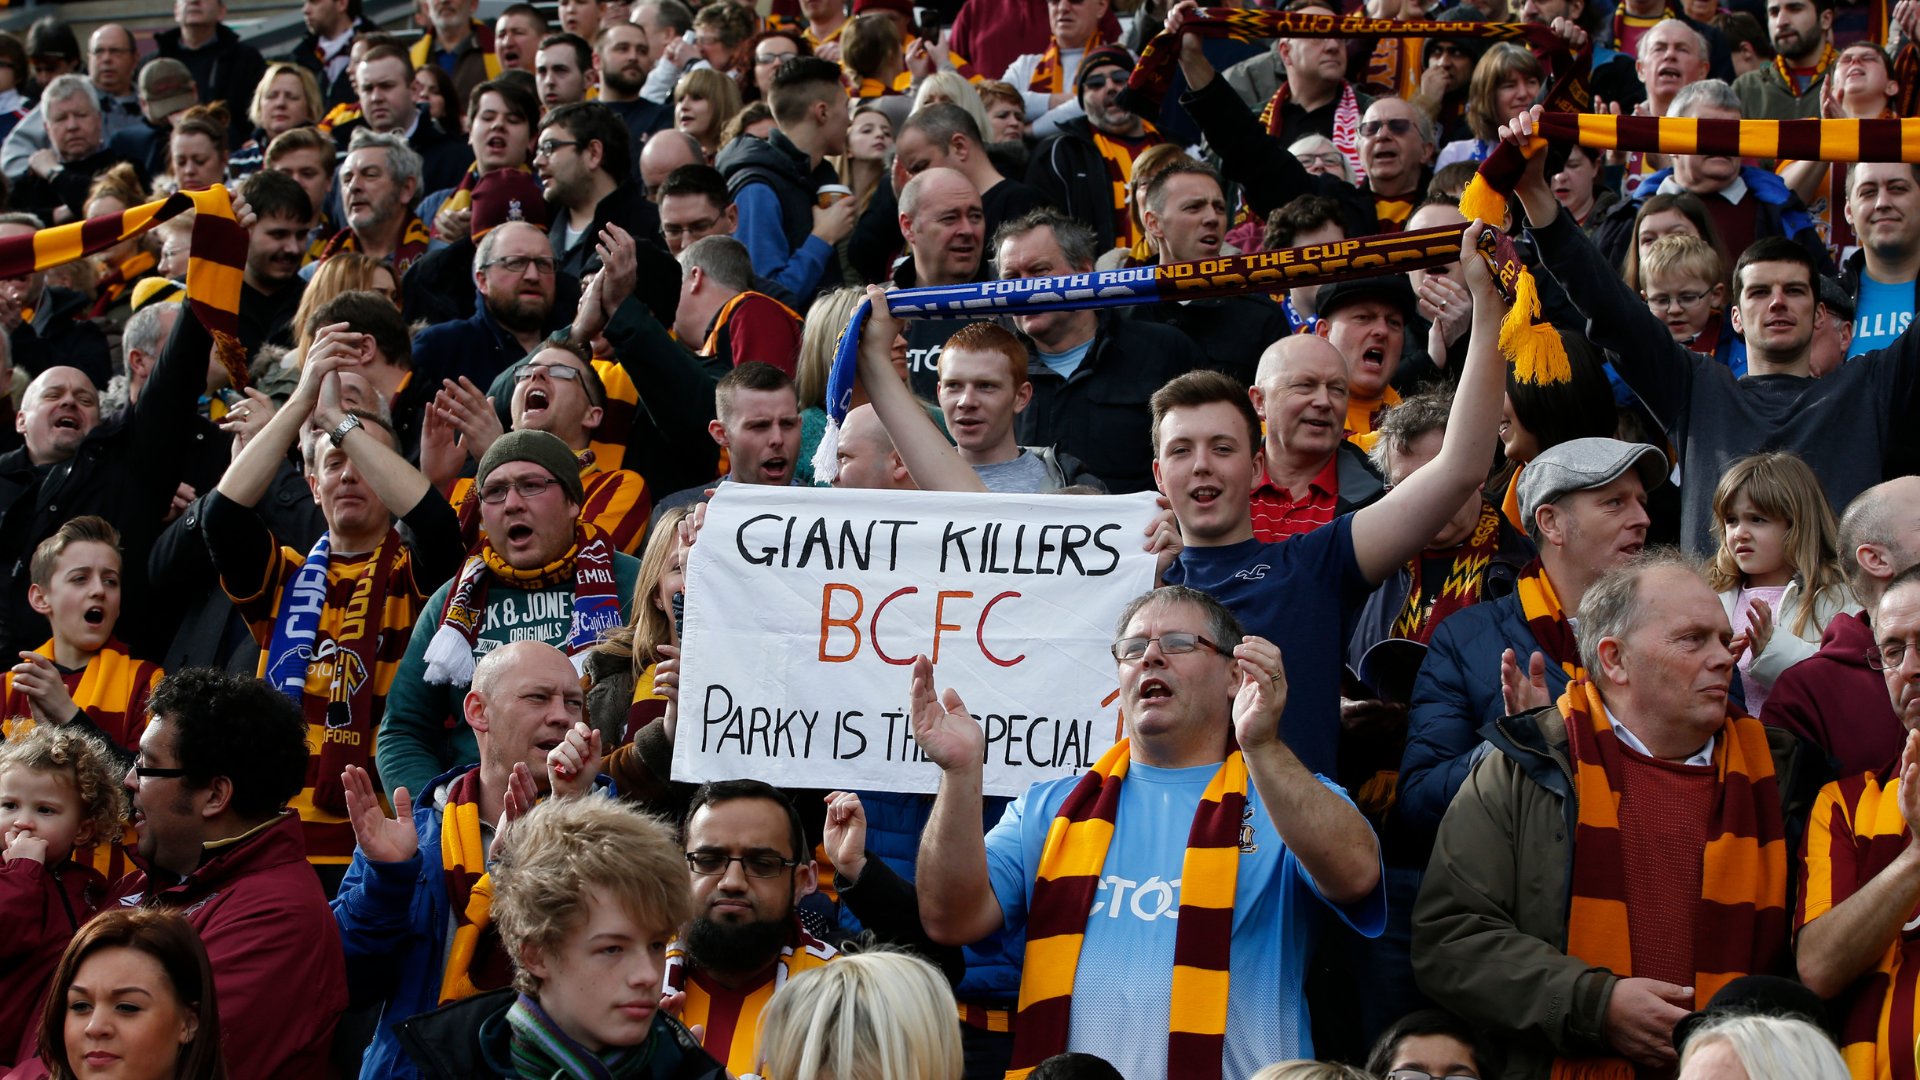 Bradford City fans at Valley Parade during an FA Cup fixture